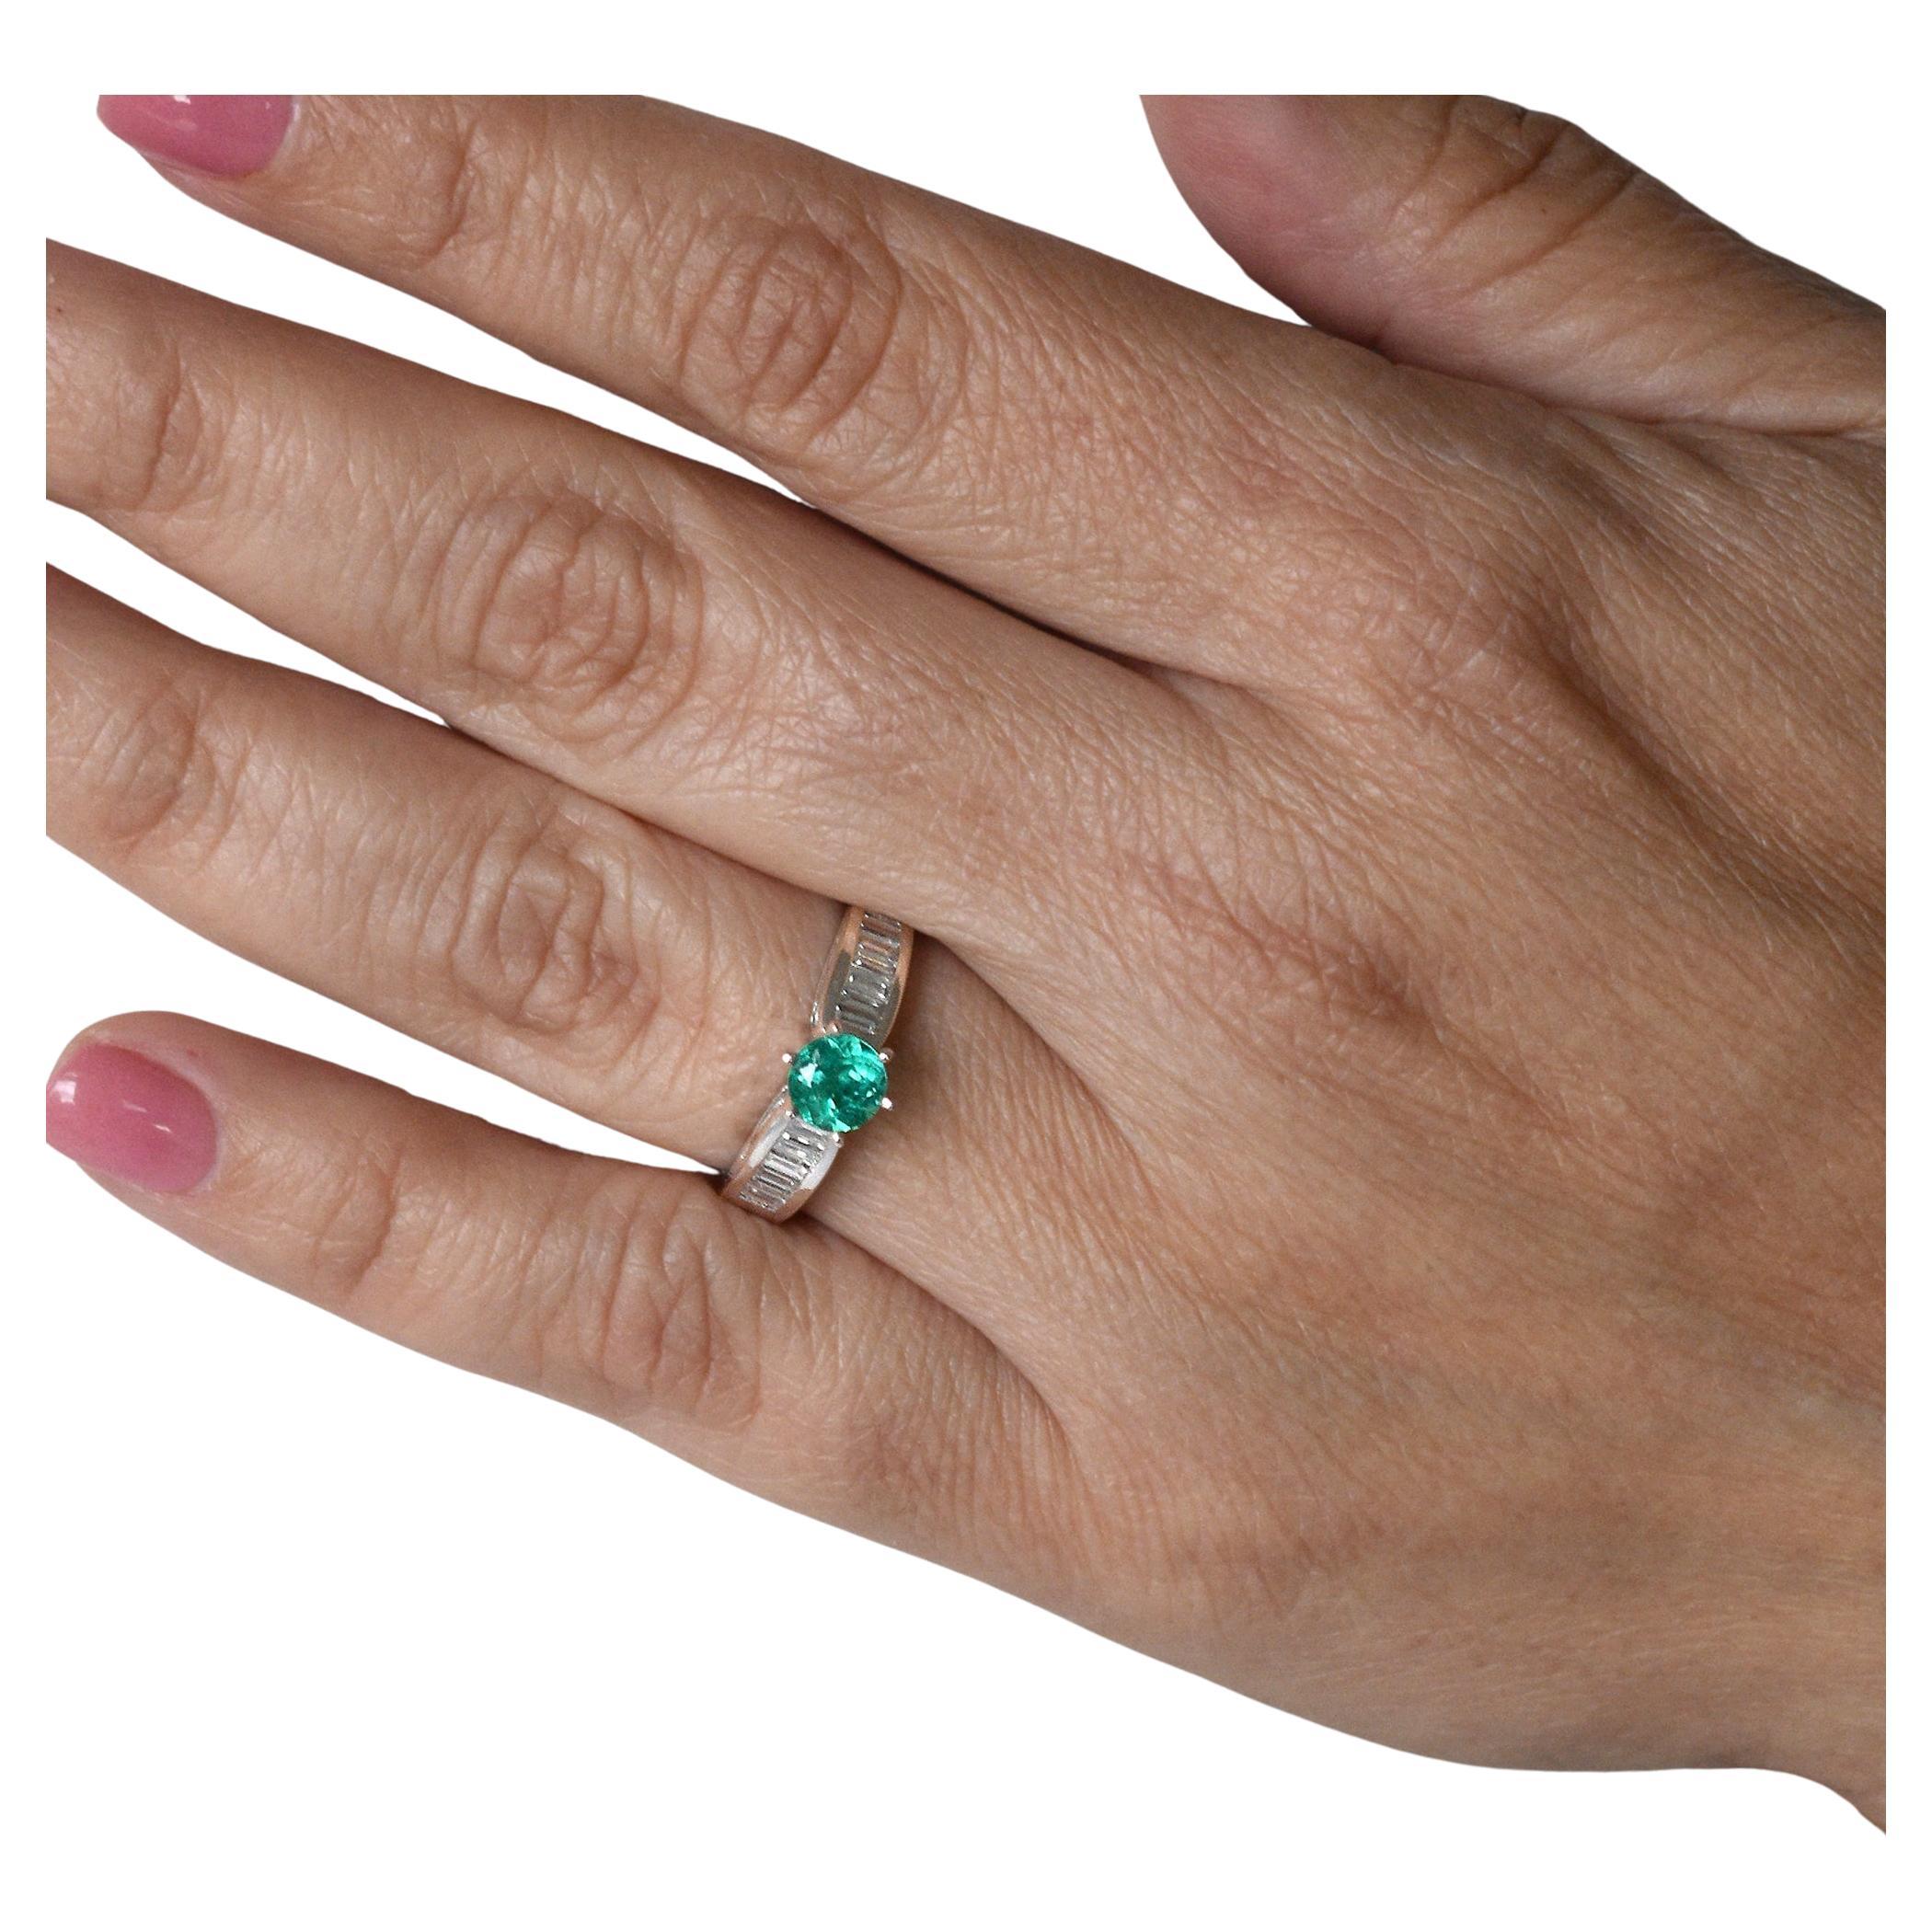 0.66 Carats Emerald Engagement Ring in White Gold With Baguette Cut Diamonds